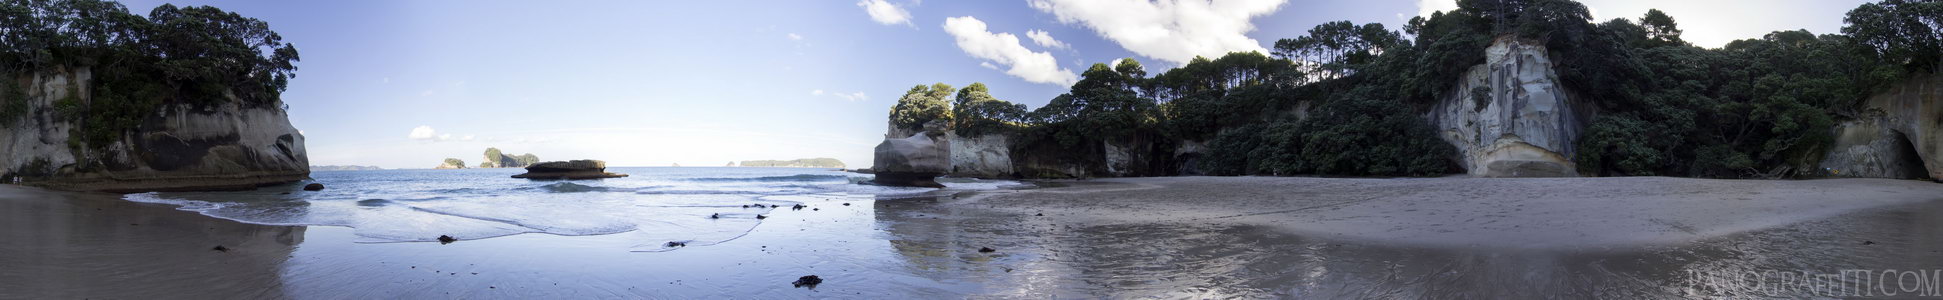 Mare's Leg Cove 360 - A 360 degree view of Mares Leg Cove in Cathedral Cove